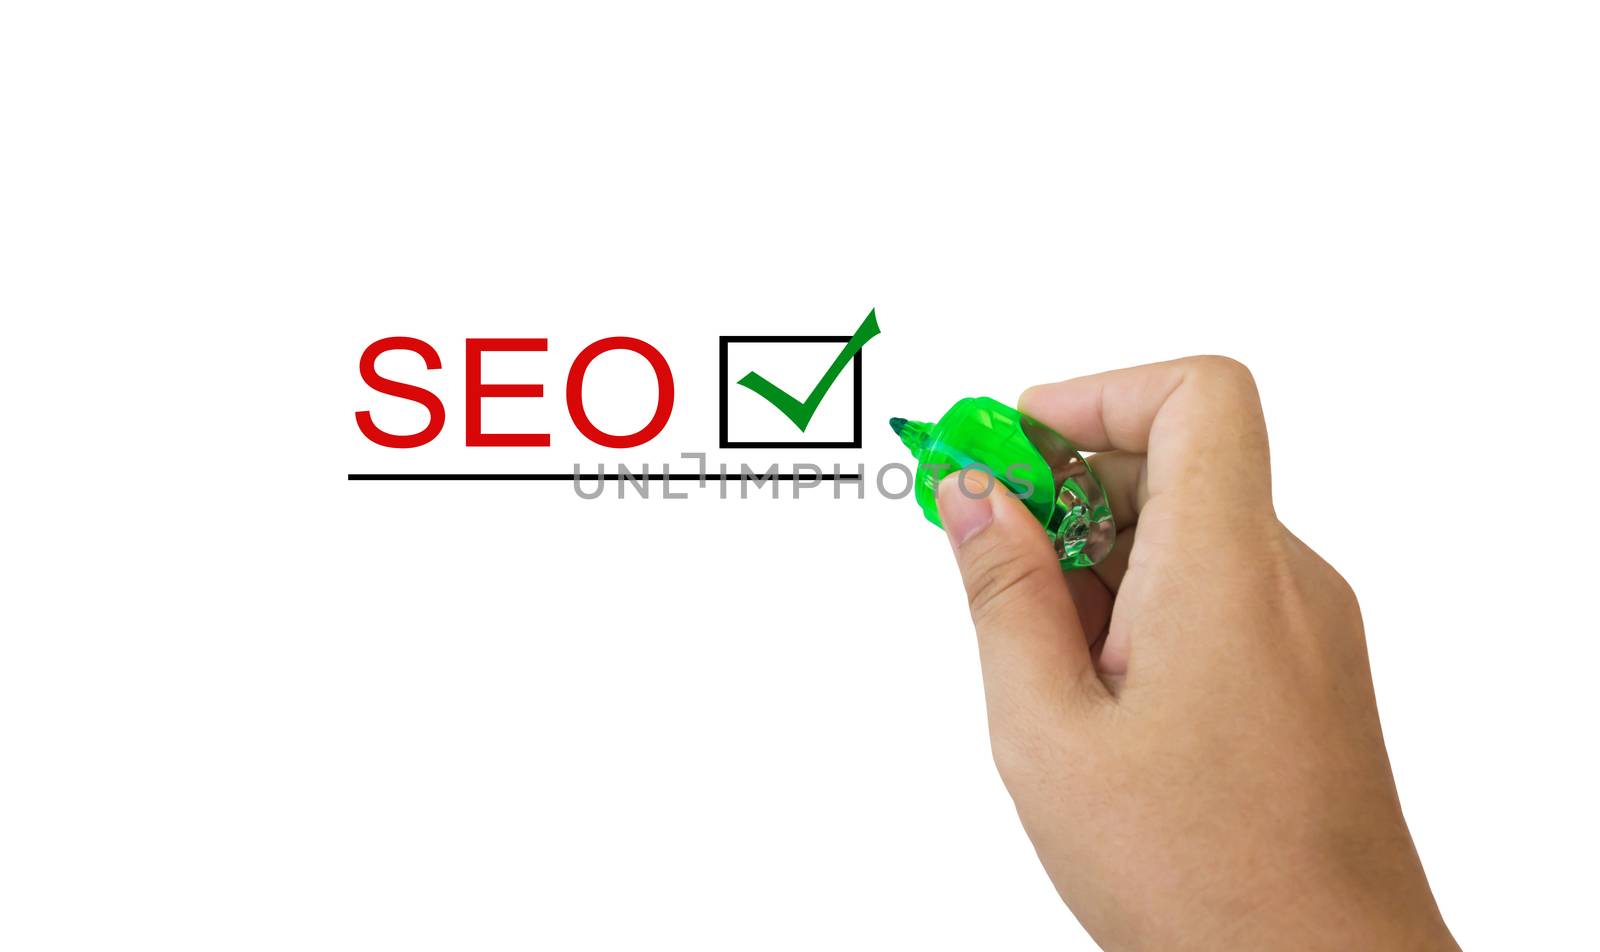 Text SEO in red colour with isolated hand and marker pen writing on white background